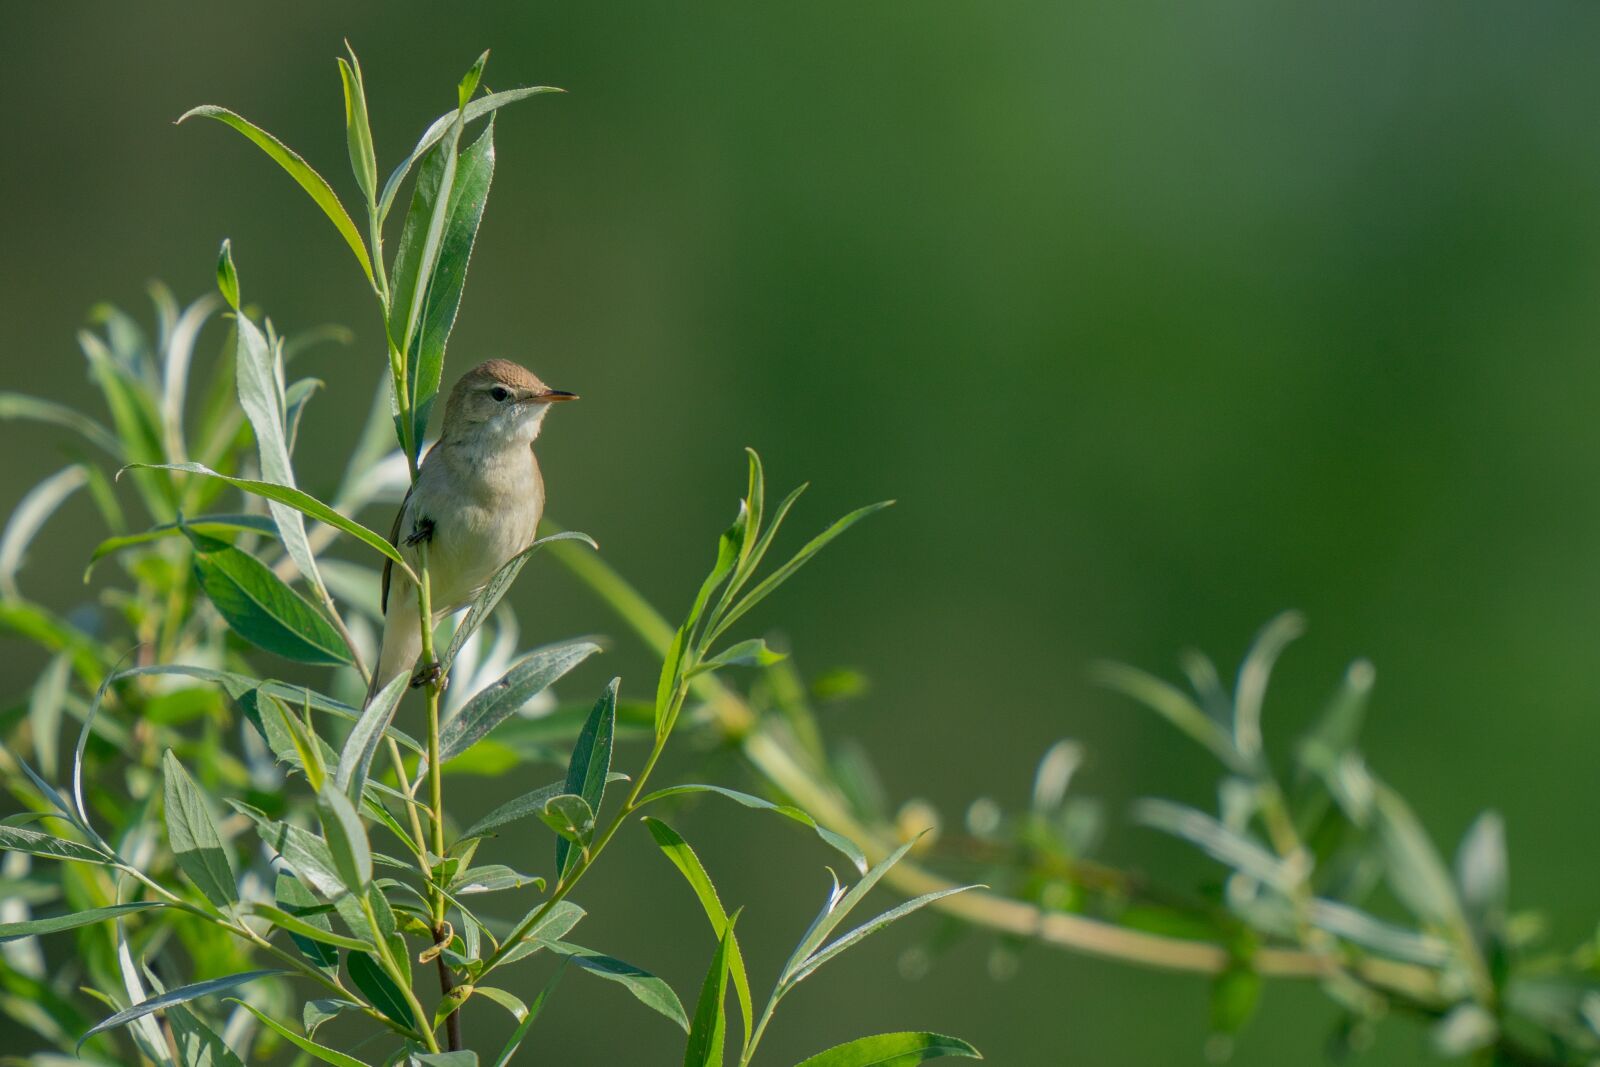 Sony a9 sample photo. Blyth's reed warbler, acrocephalus photography